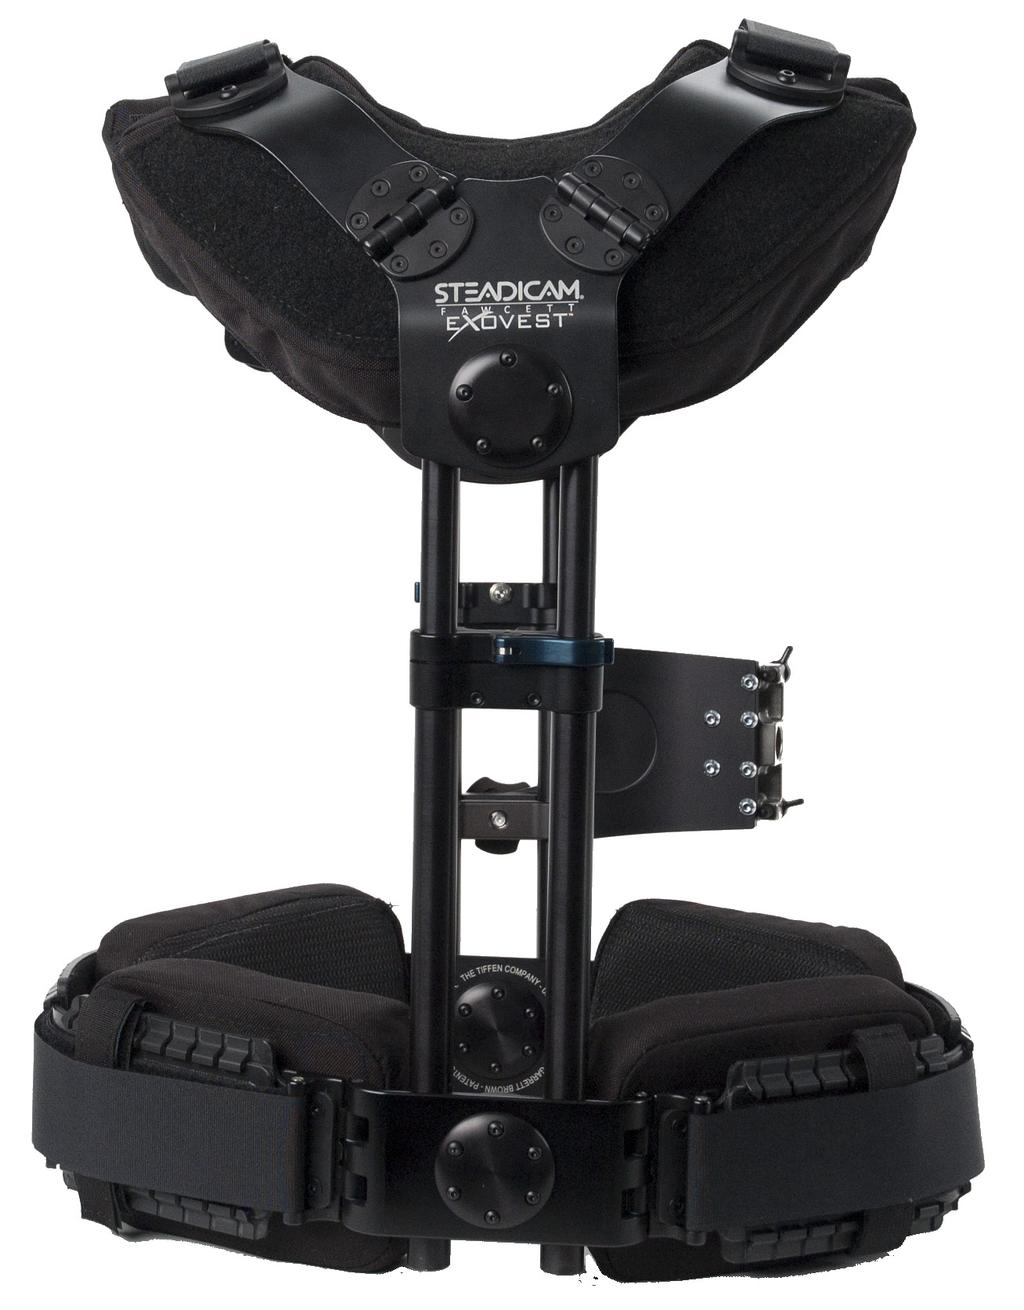 Introduction The Steadicam Fawcett Exovest is a semi-rigid exoskeletal vest that transfers the weight and torque of supporting a Steadicam into anatomically appropriate areas, without interfering